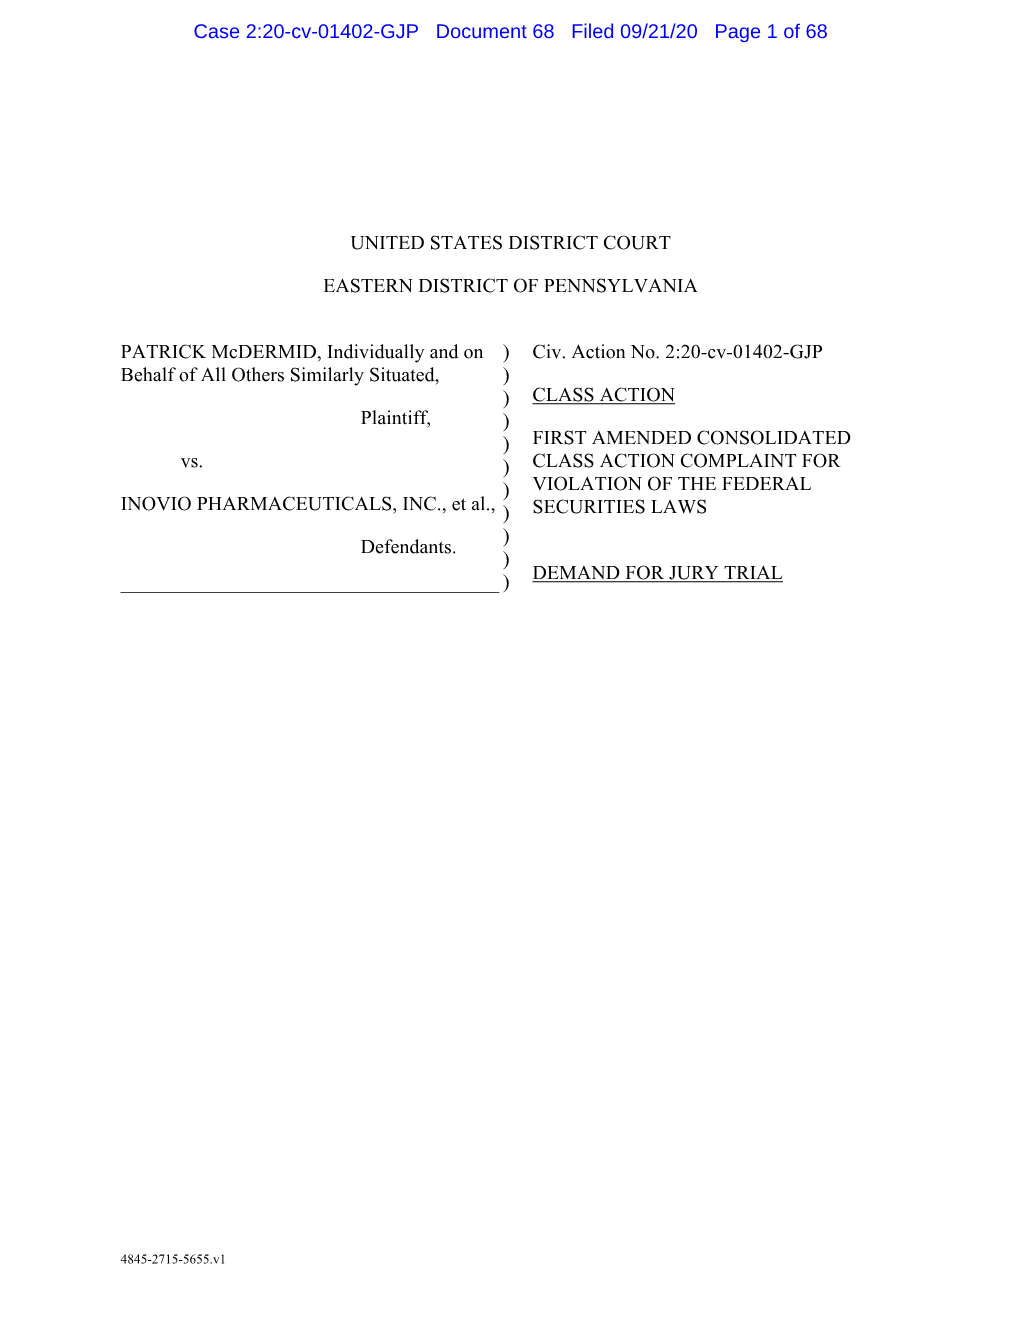 Case 2:20-Cv-01402-GJP Document 68 Filed 09/21/20 Page 1 of 68